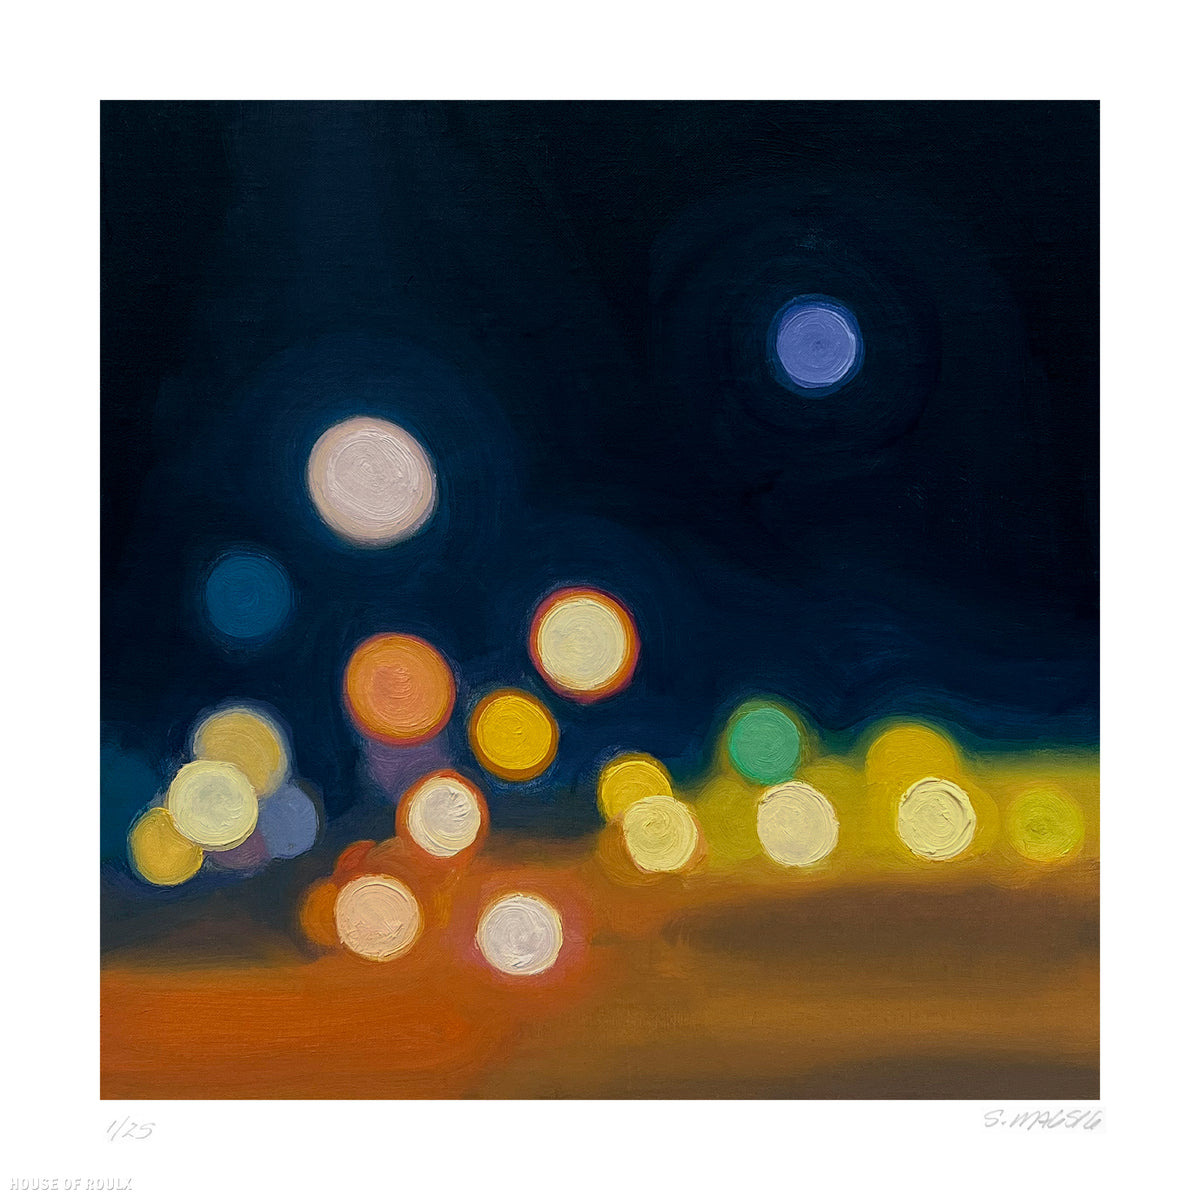 Stephen Magsig &quot;Citylights 565&quot; - Archival Print, Limited Edition of 25 - 12 x 12&quot;